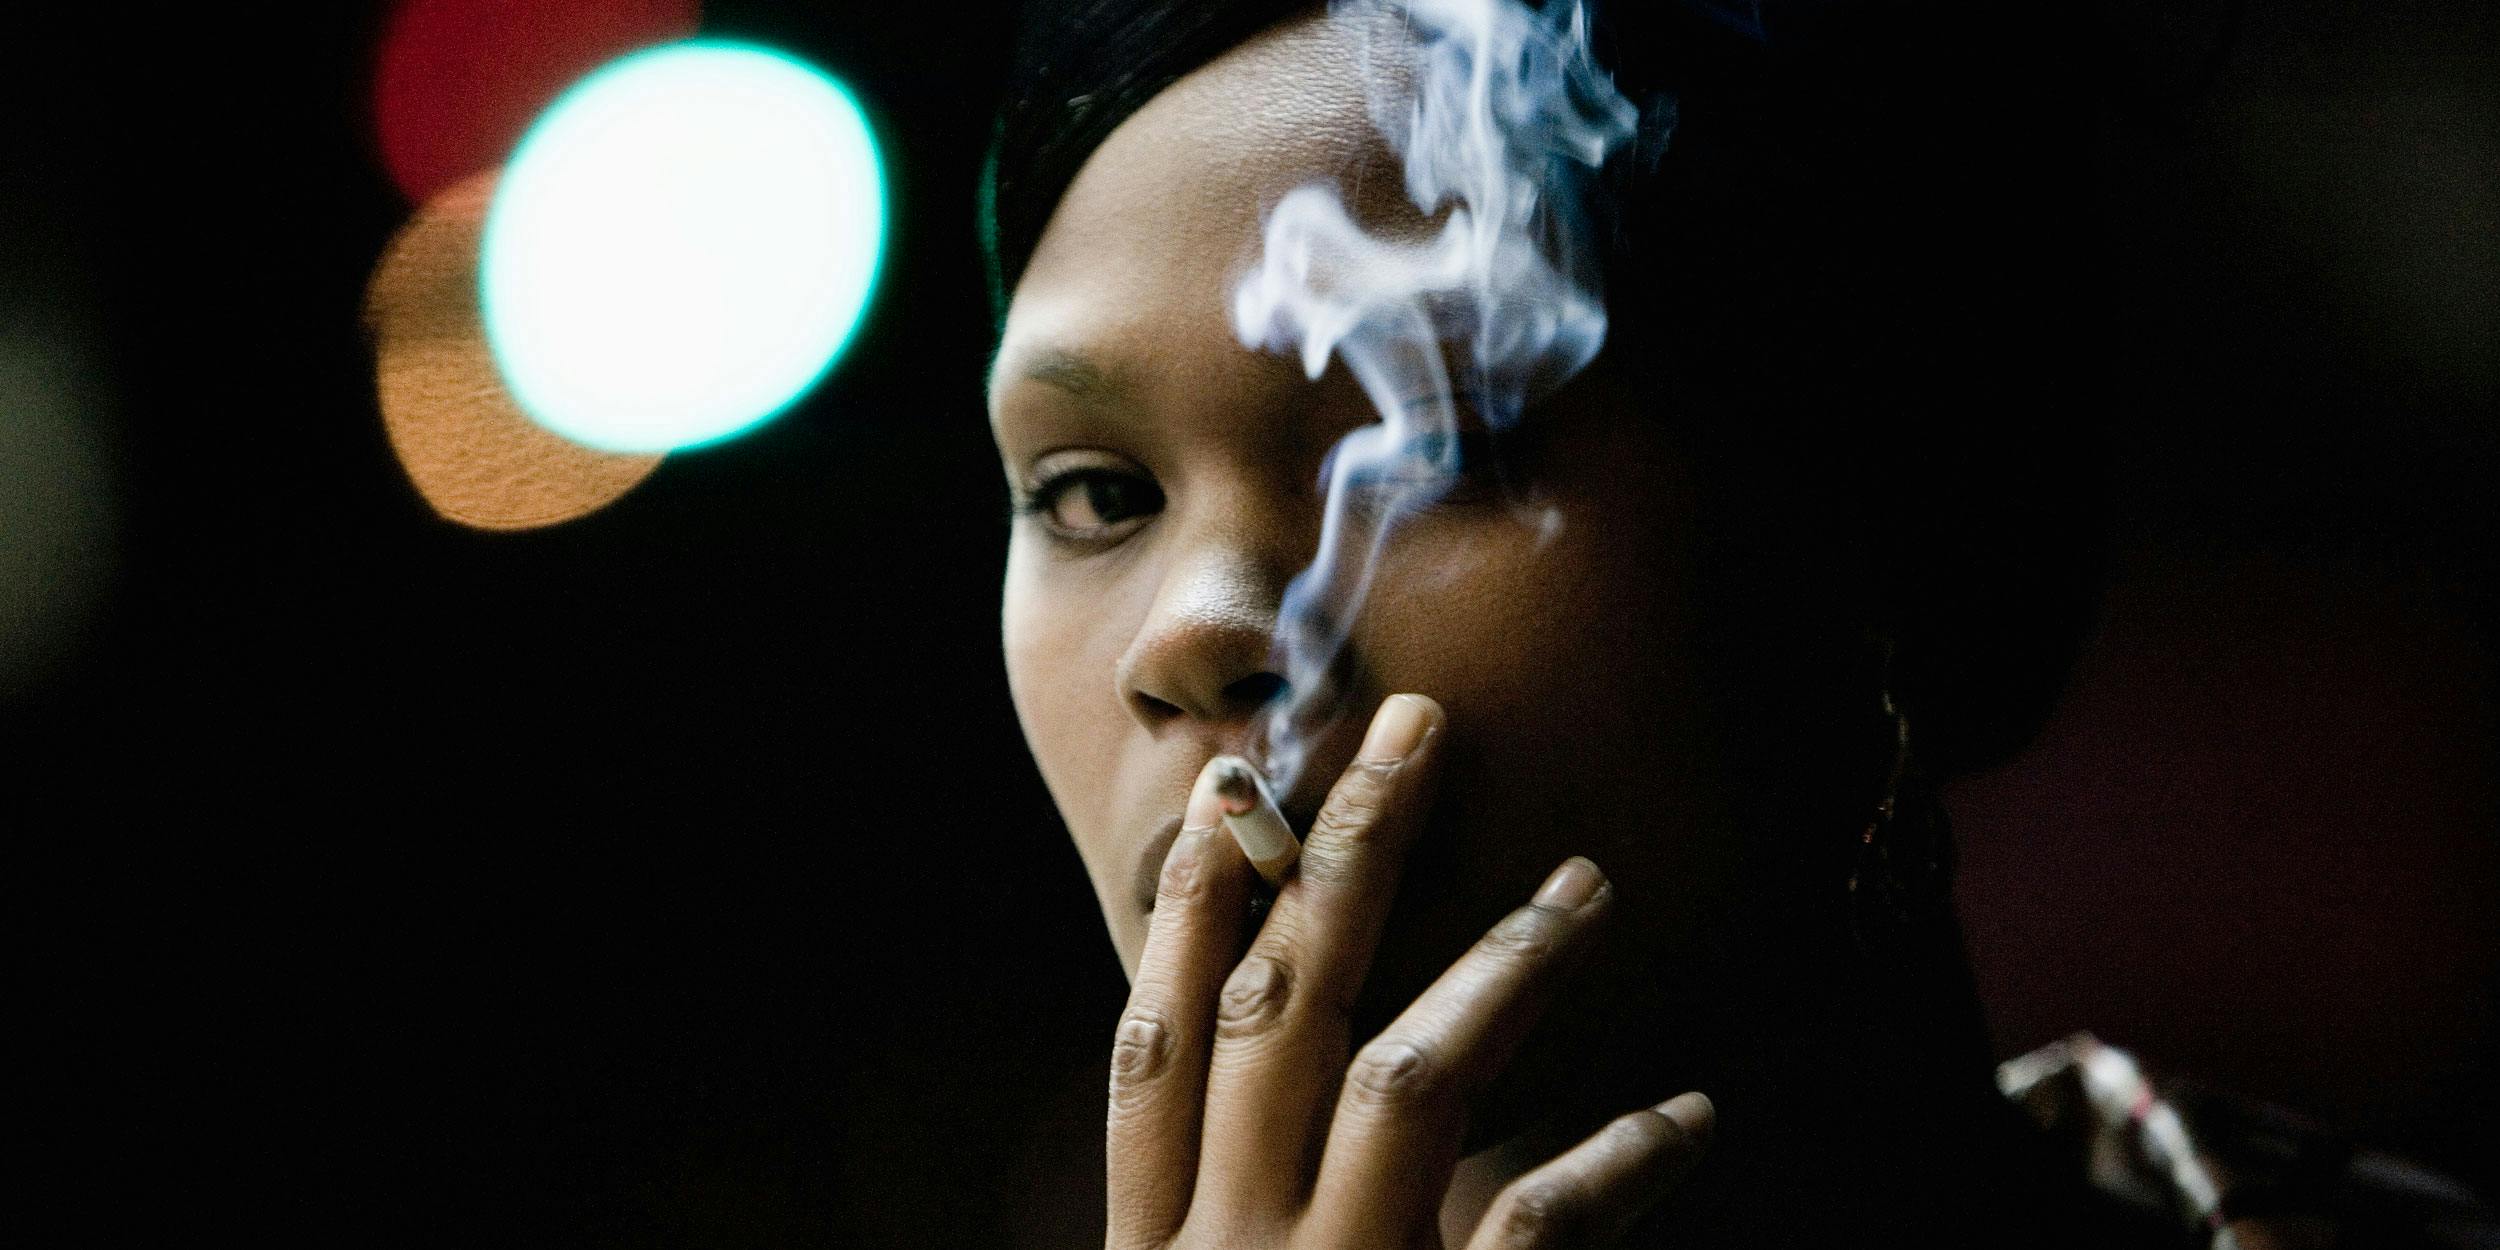 Woman smoking a cigarette. Imperial Brands is investing in the cannabis industry